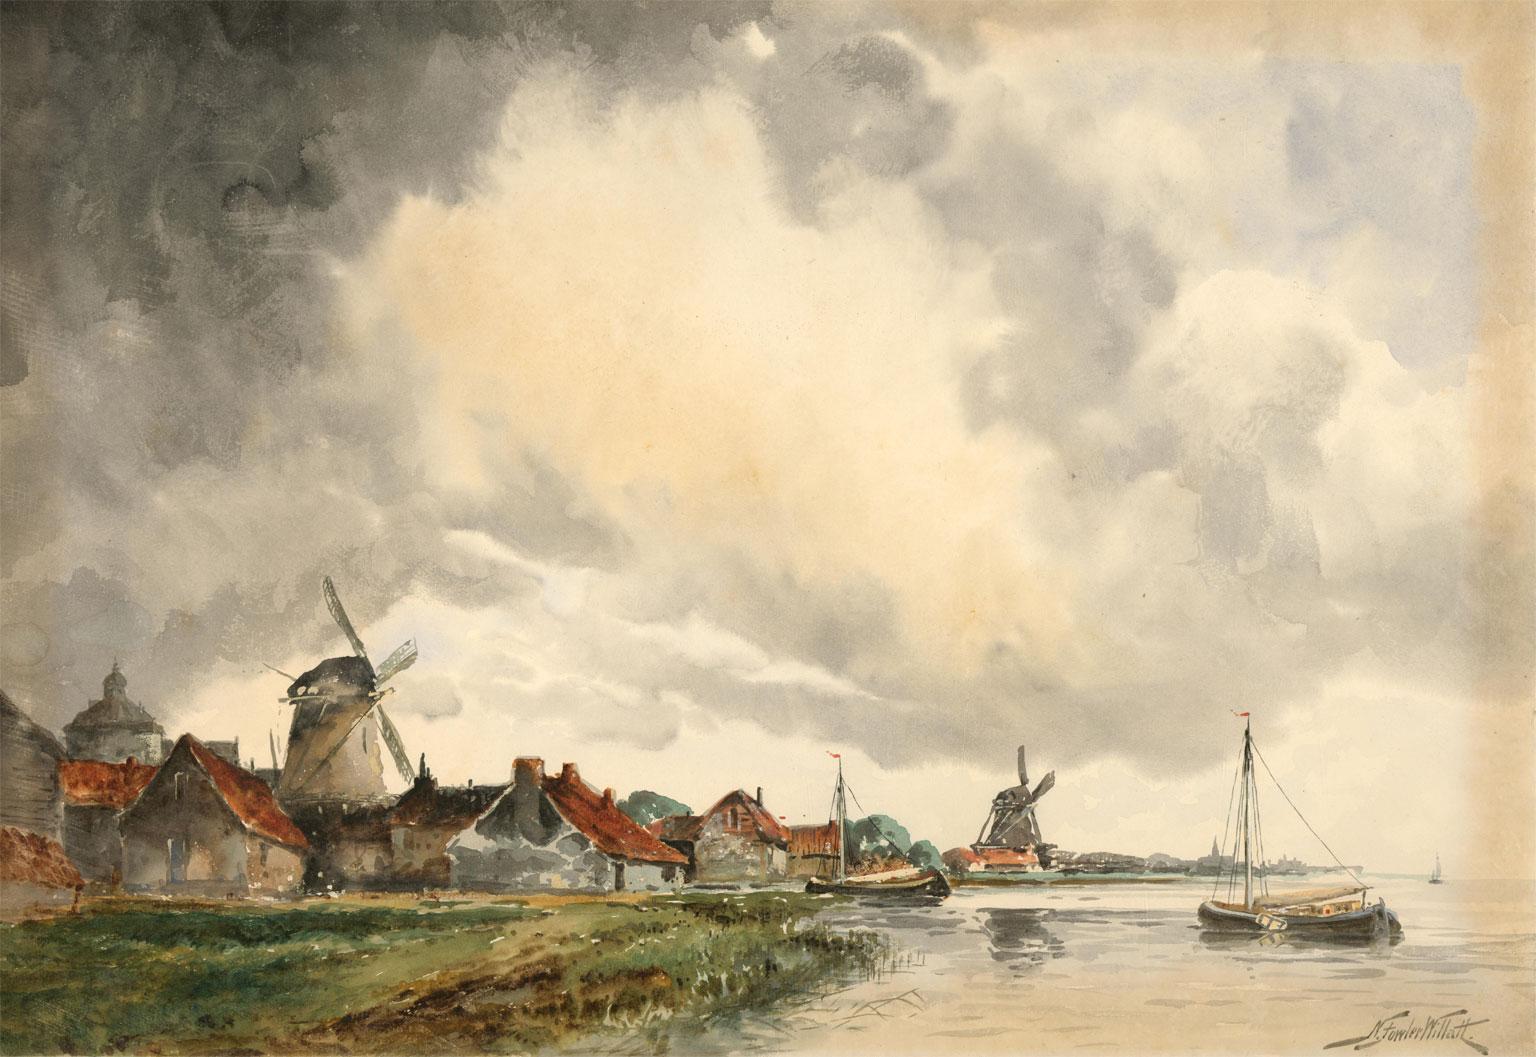 Better known as Louis Van Staaten, Norris Fowler Willatt is a well listed watercolourist, known mostly for his Dutch harbour scenes, depicting boats and streets scenes. Many works by the artist have been sold at auction, including 'Figures on barges